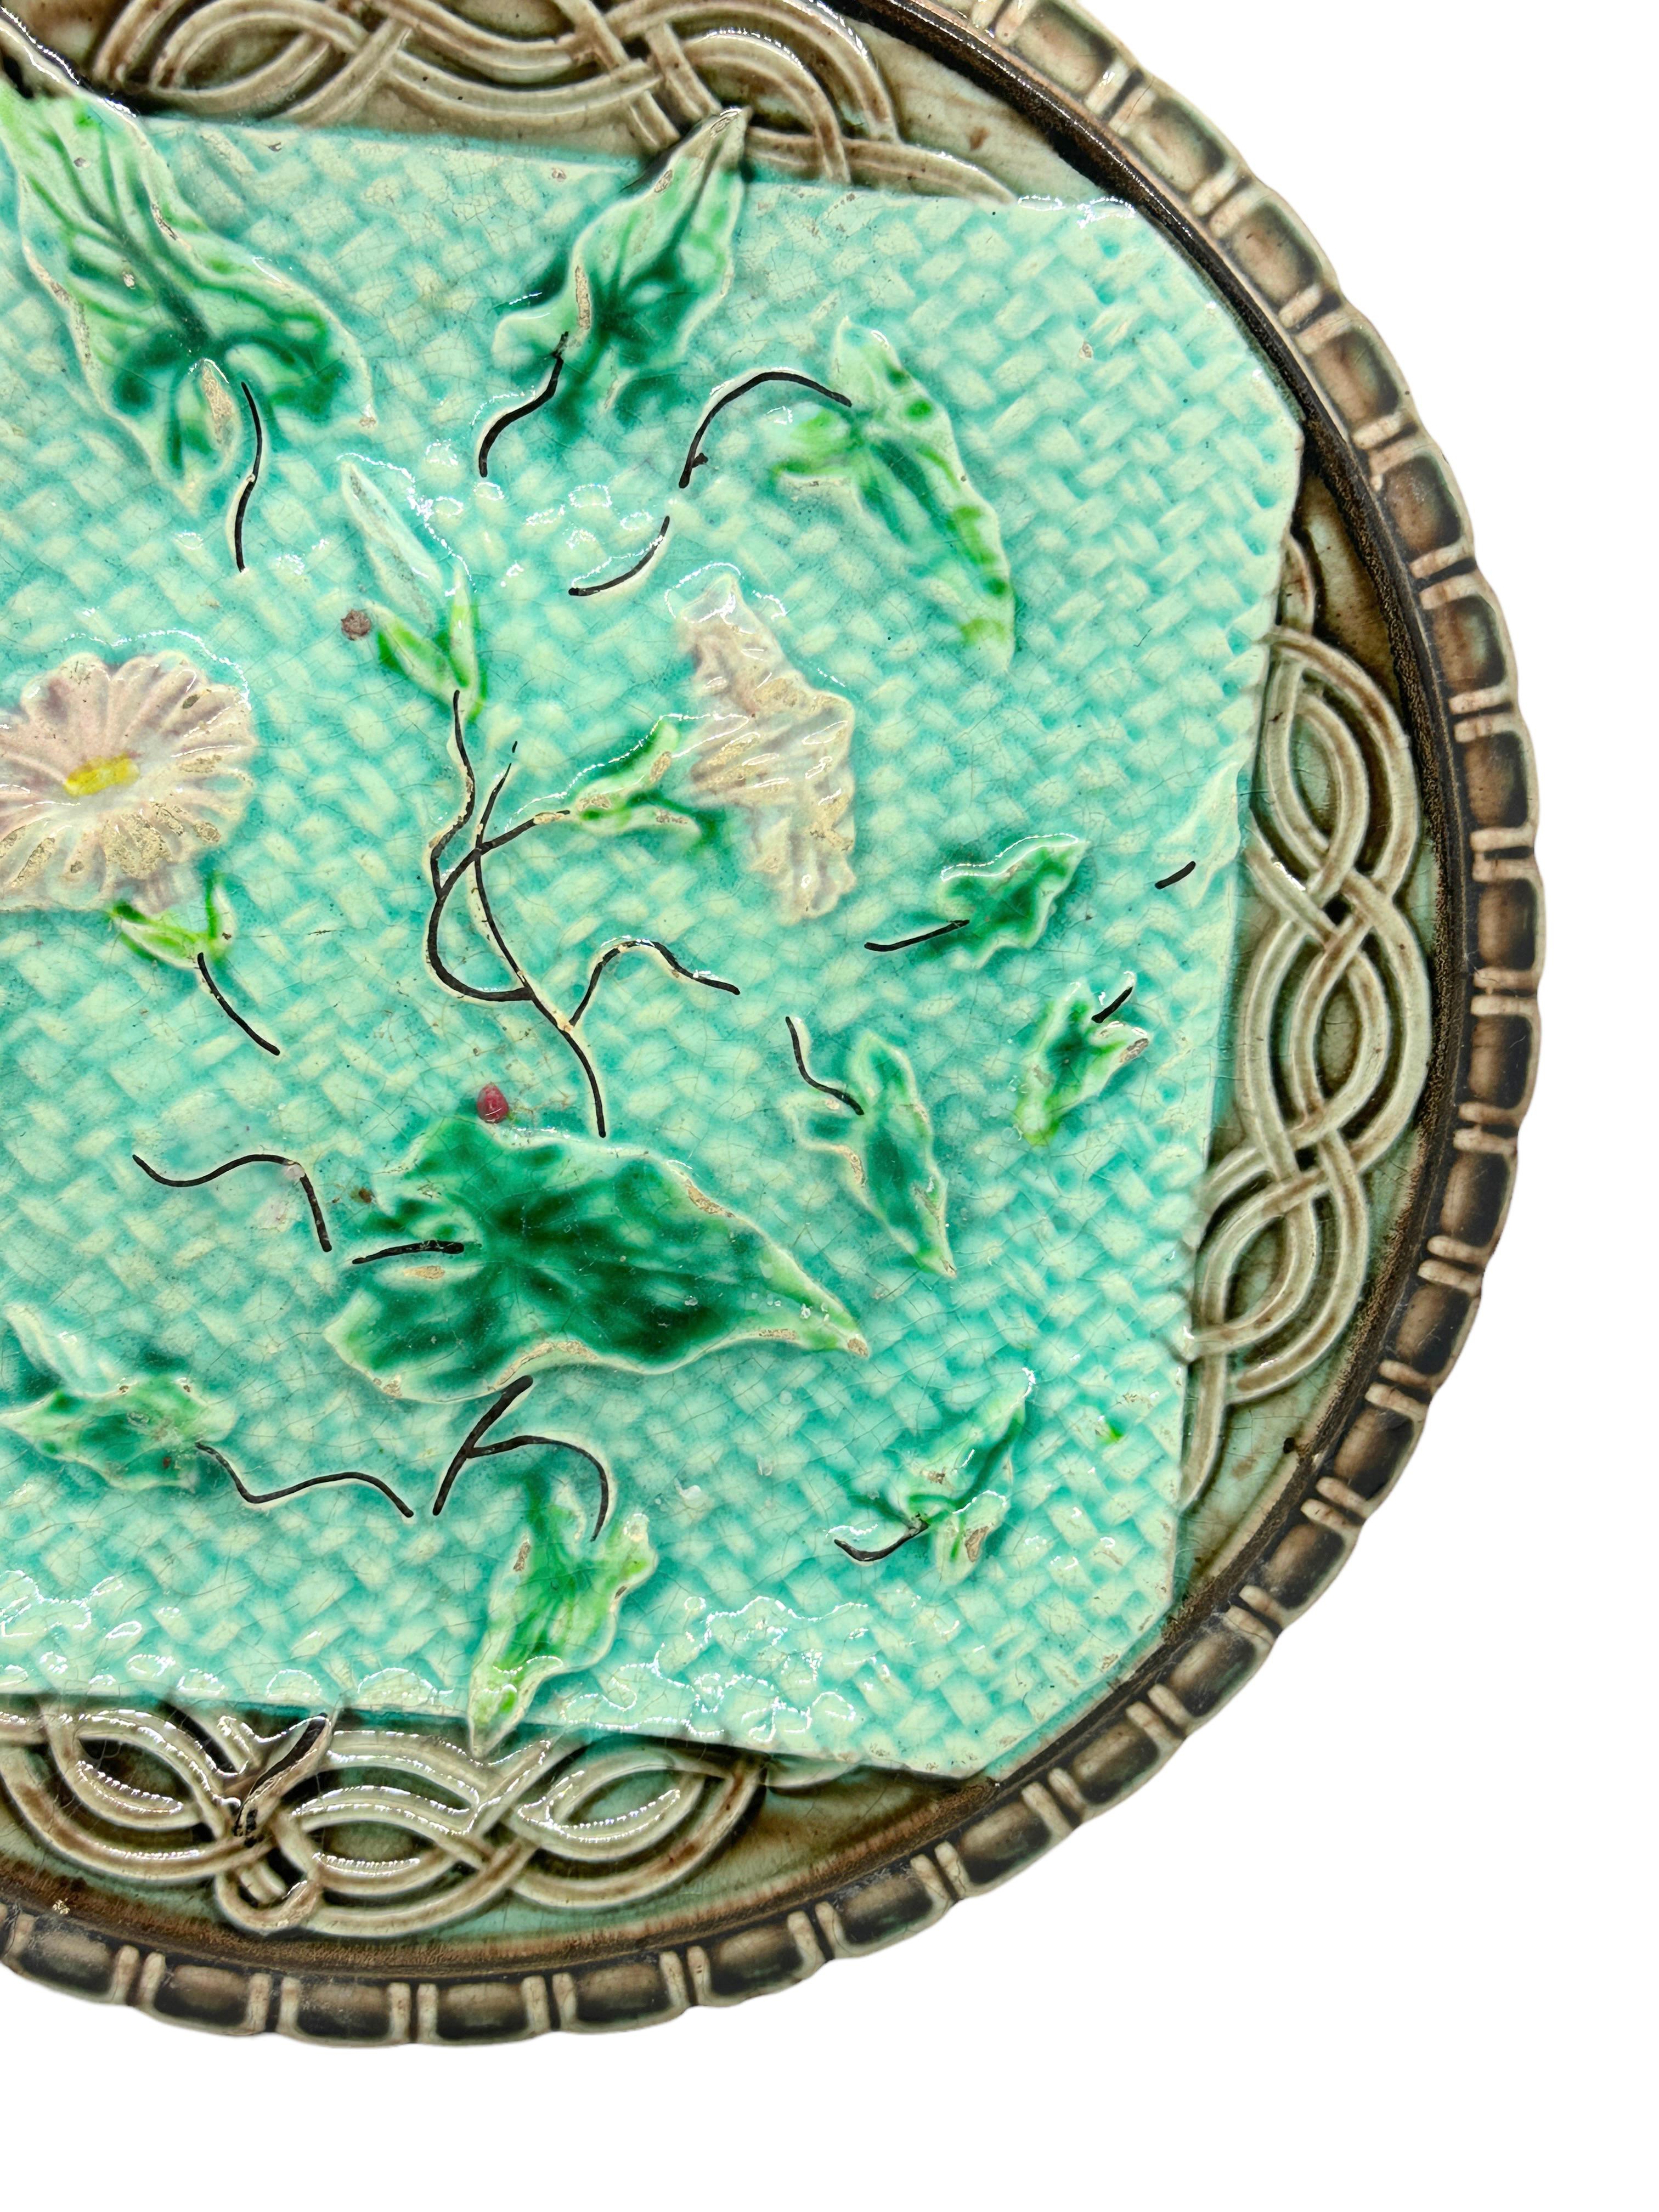 German Majolica Plate with Morning Glory, circa 1900 For Sale 5